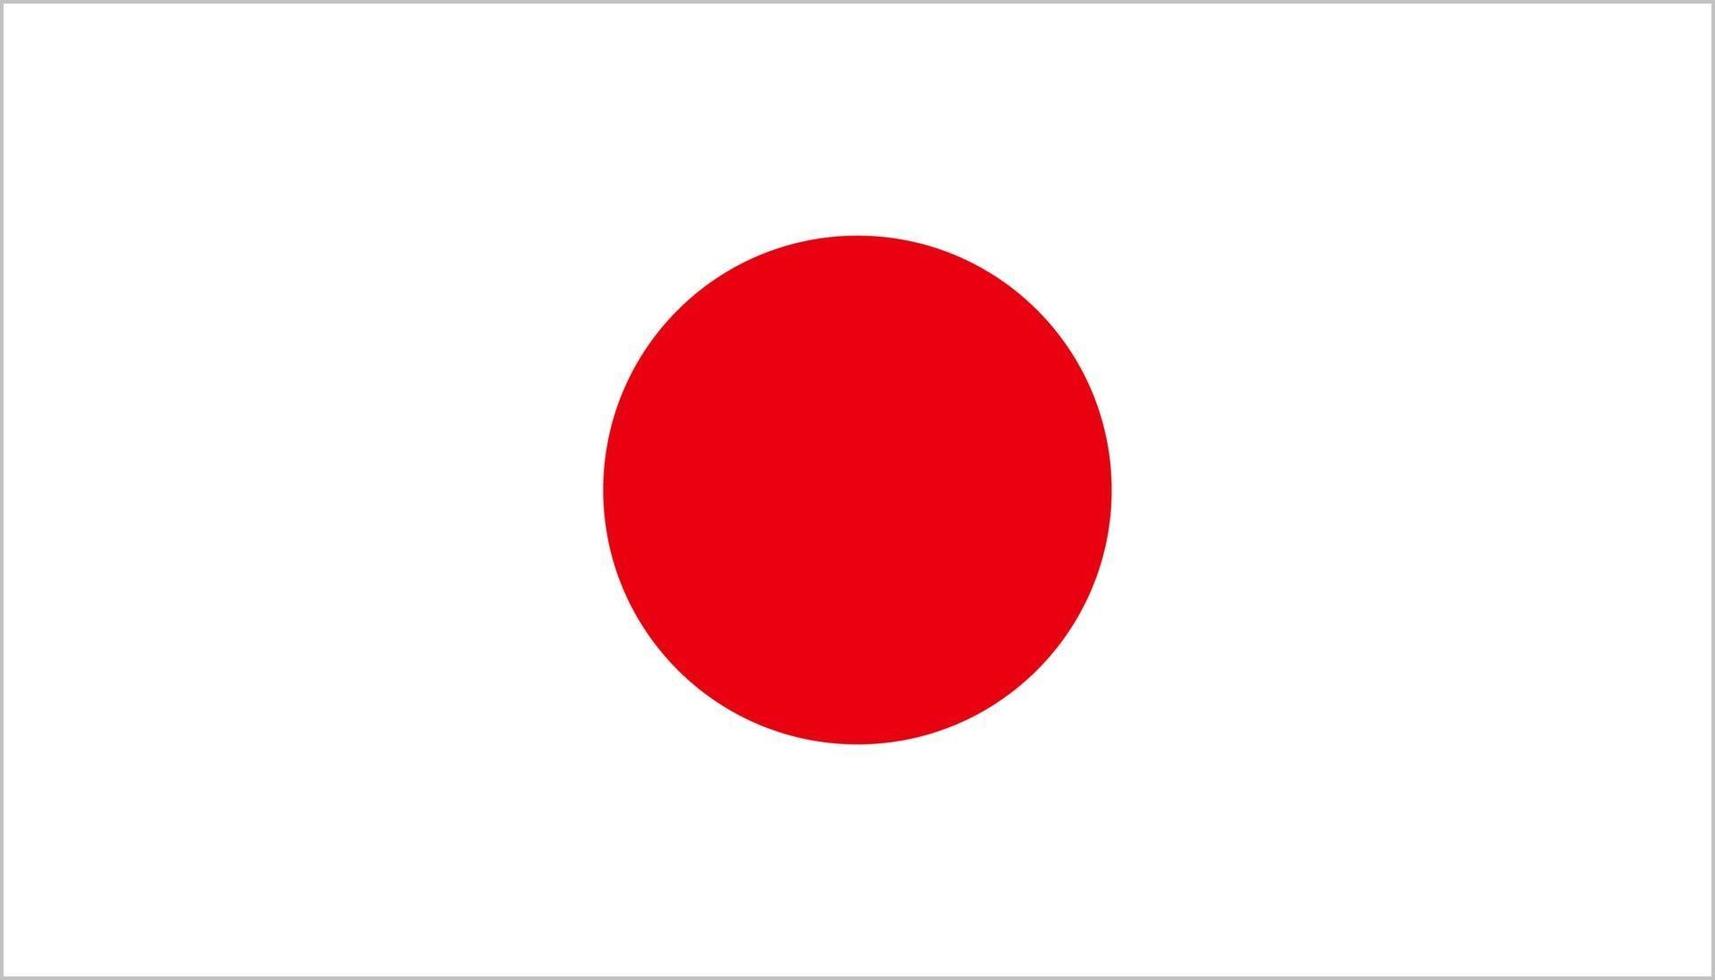 National Flag of Japan in flat style vector